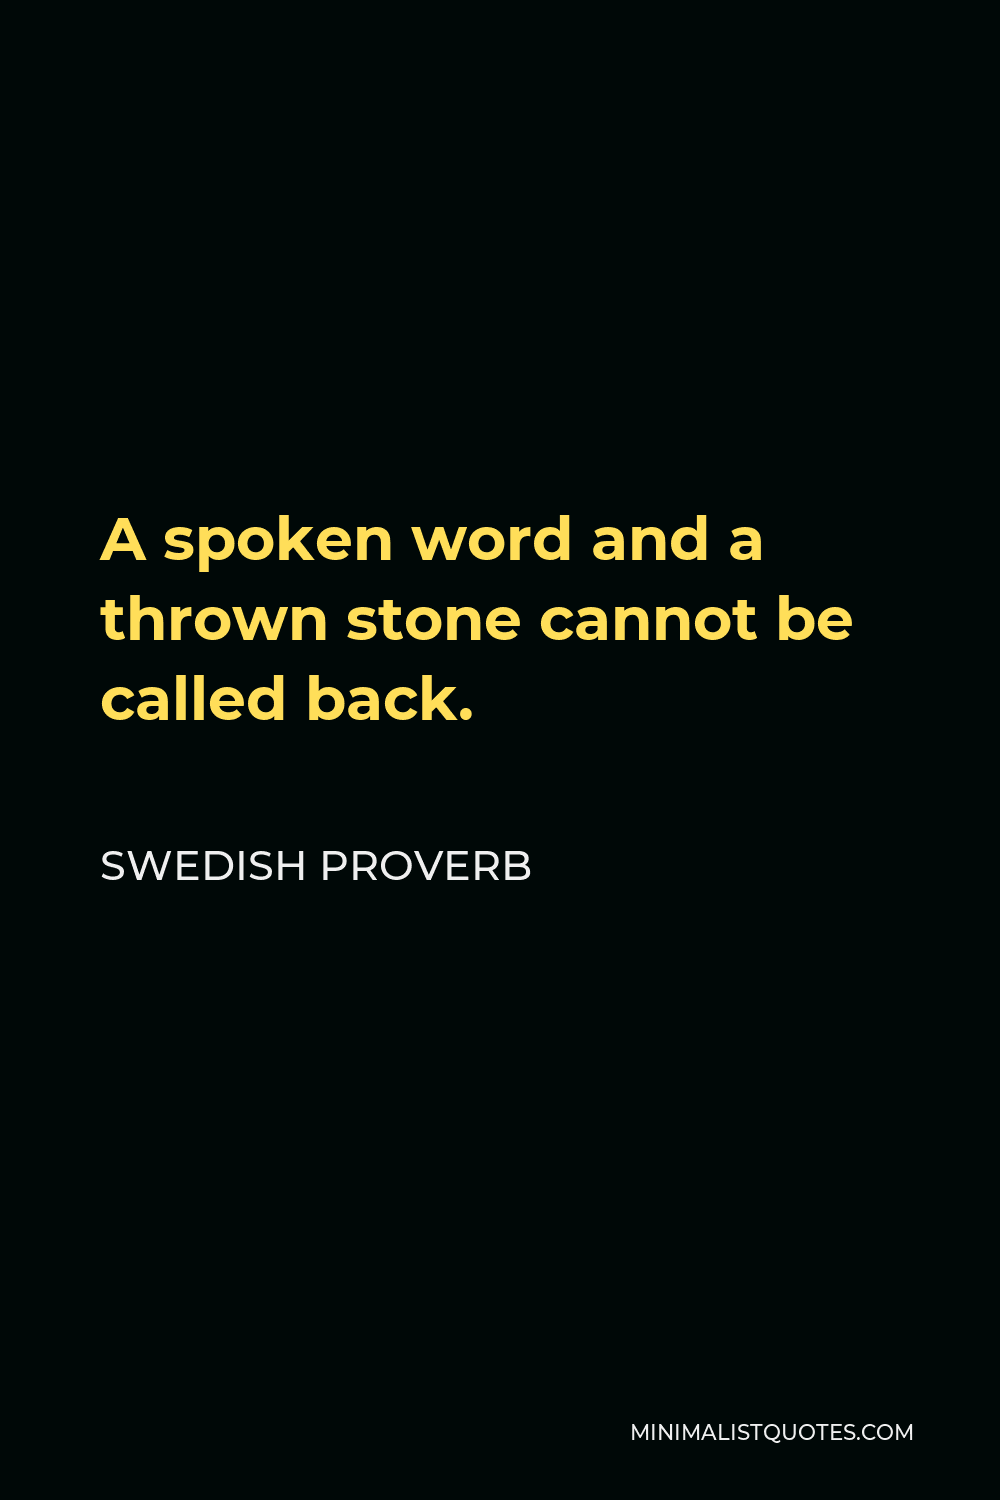 Swedish Proverb Quote - A spoken word and a thrown stone cannot be called back.